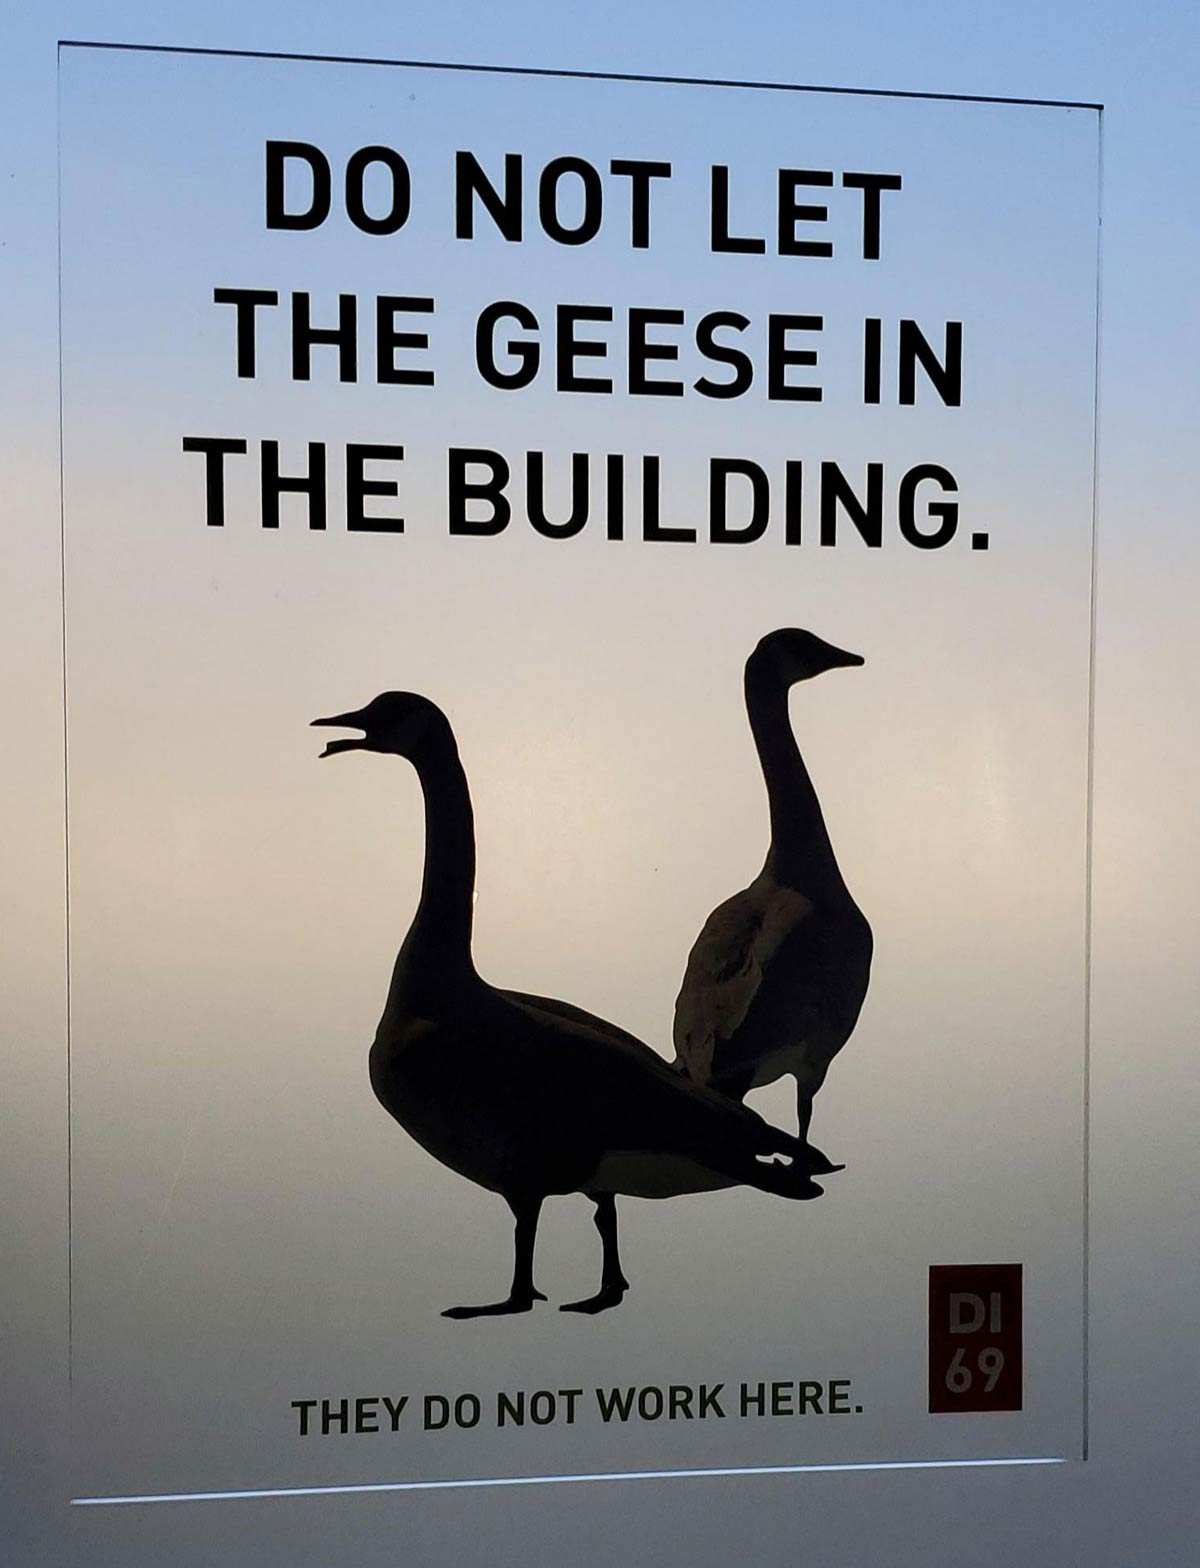 Who keeps letting the geese in the building